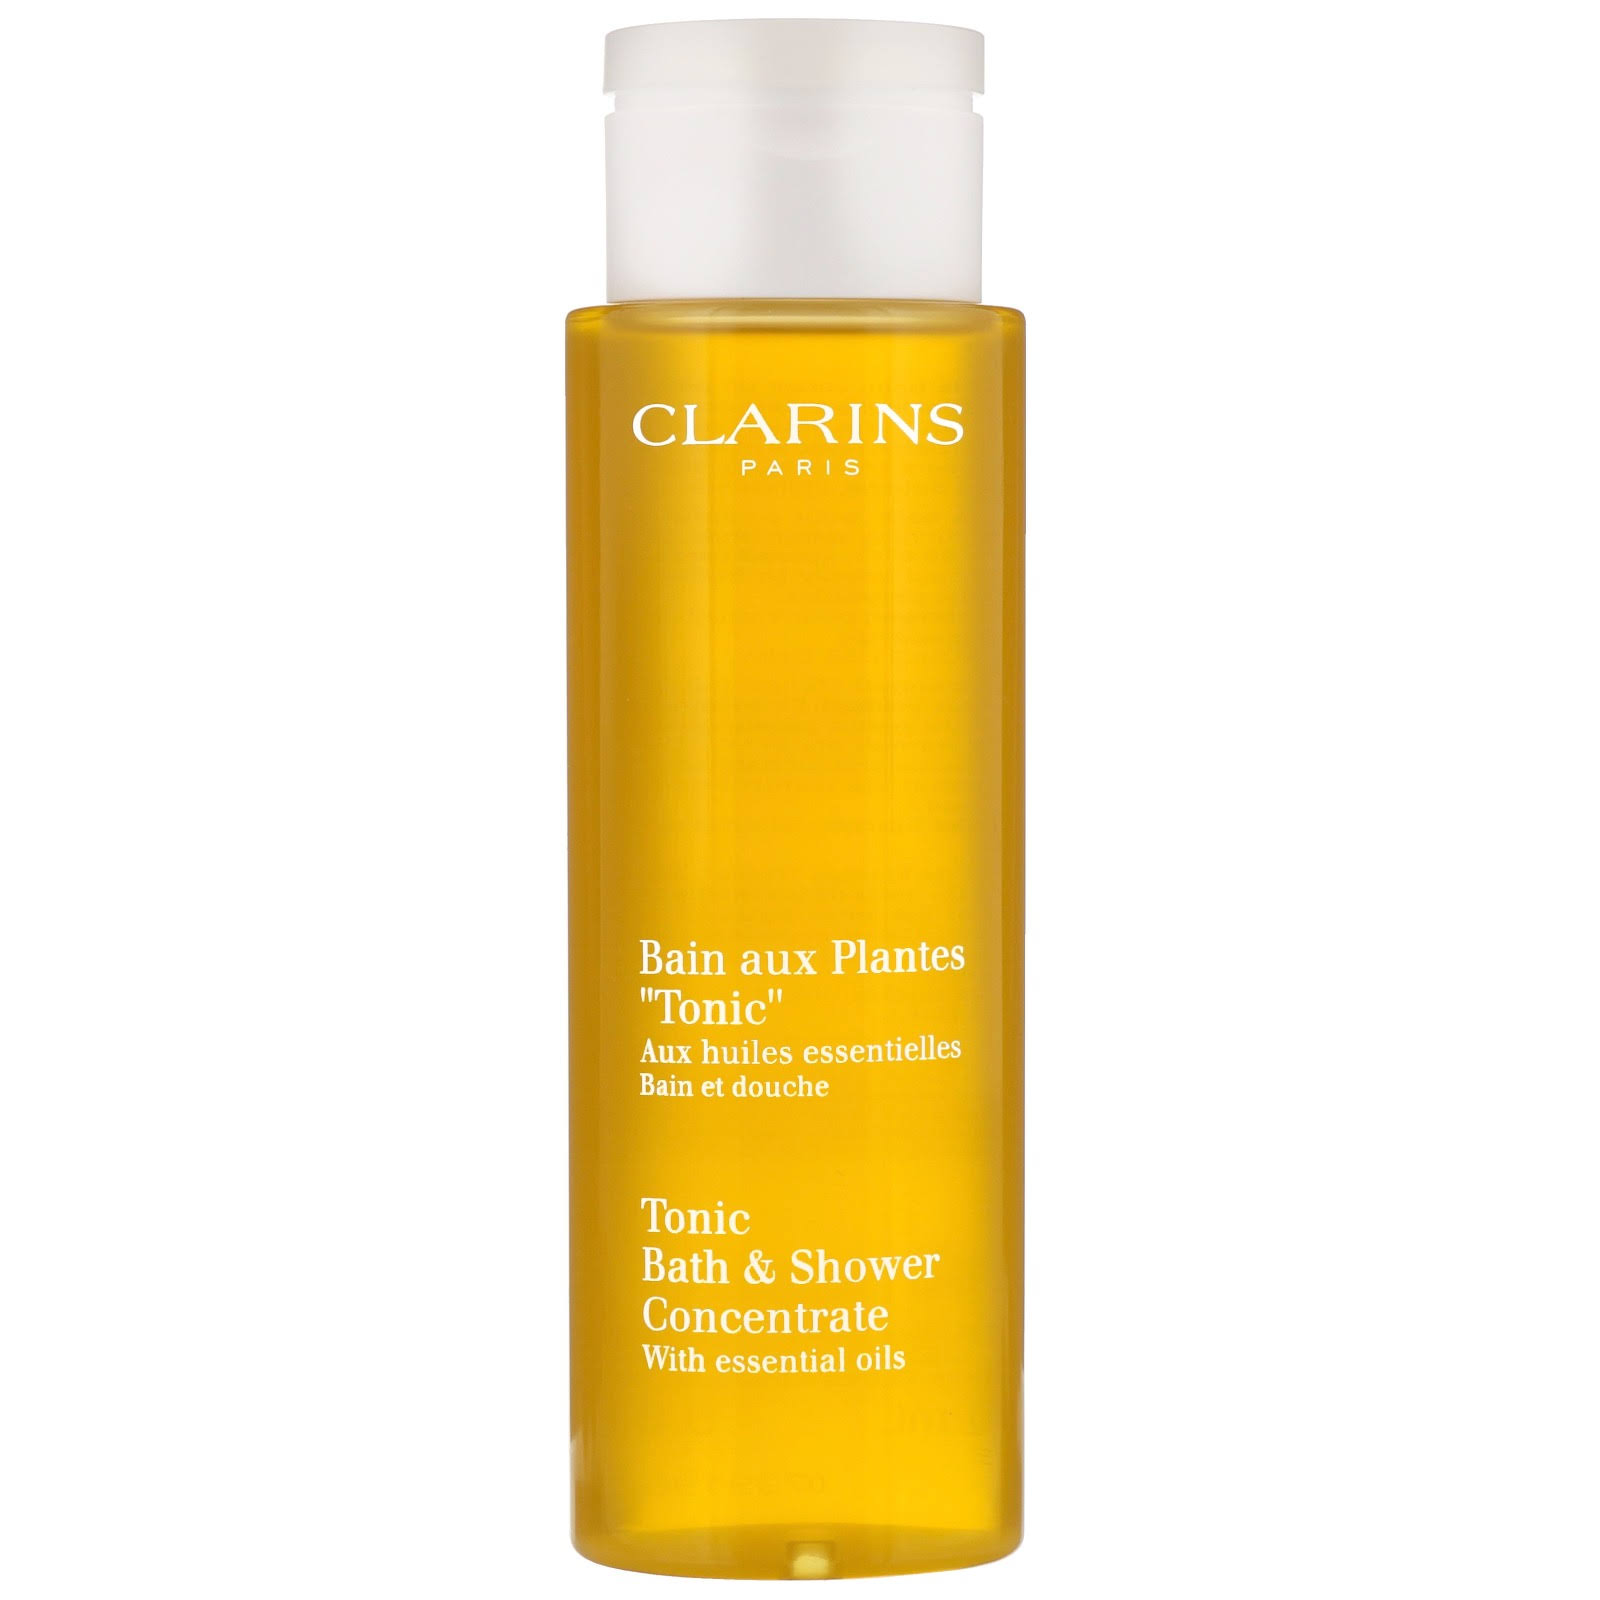 Clarins Tonic Bath and Shower Concentrate - 200ml